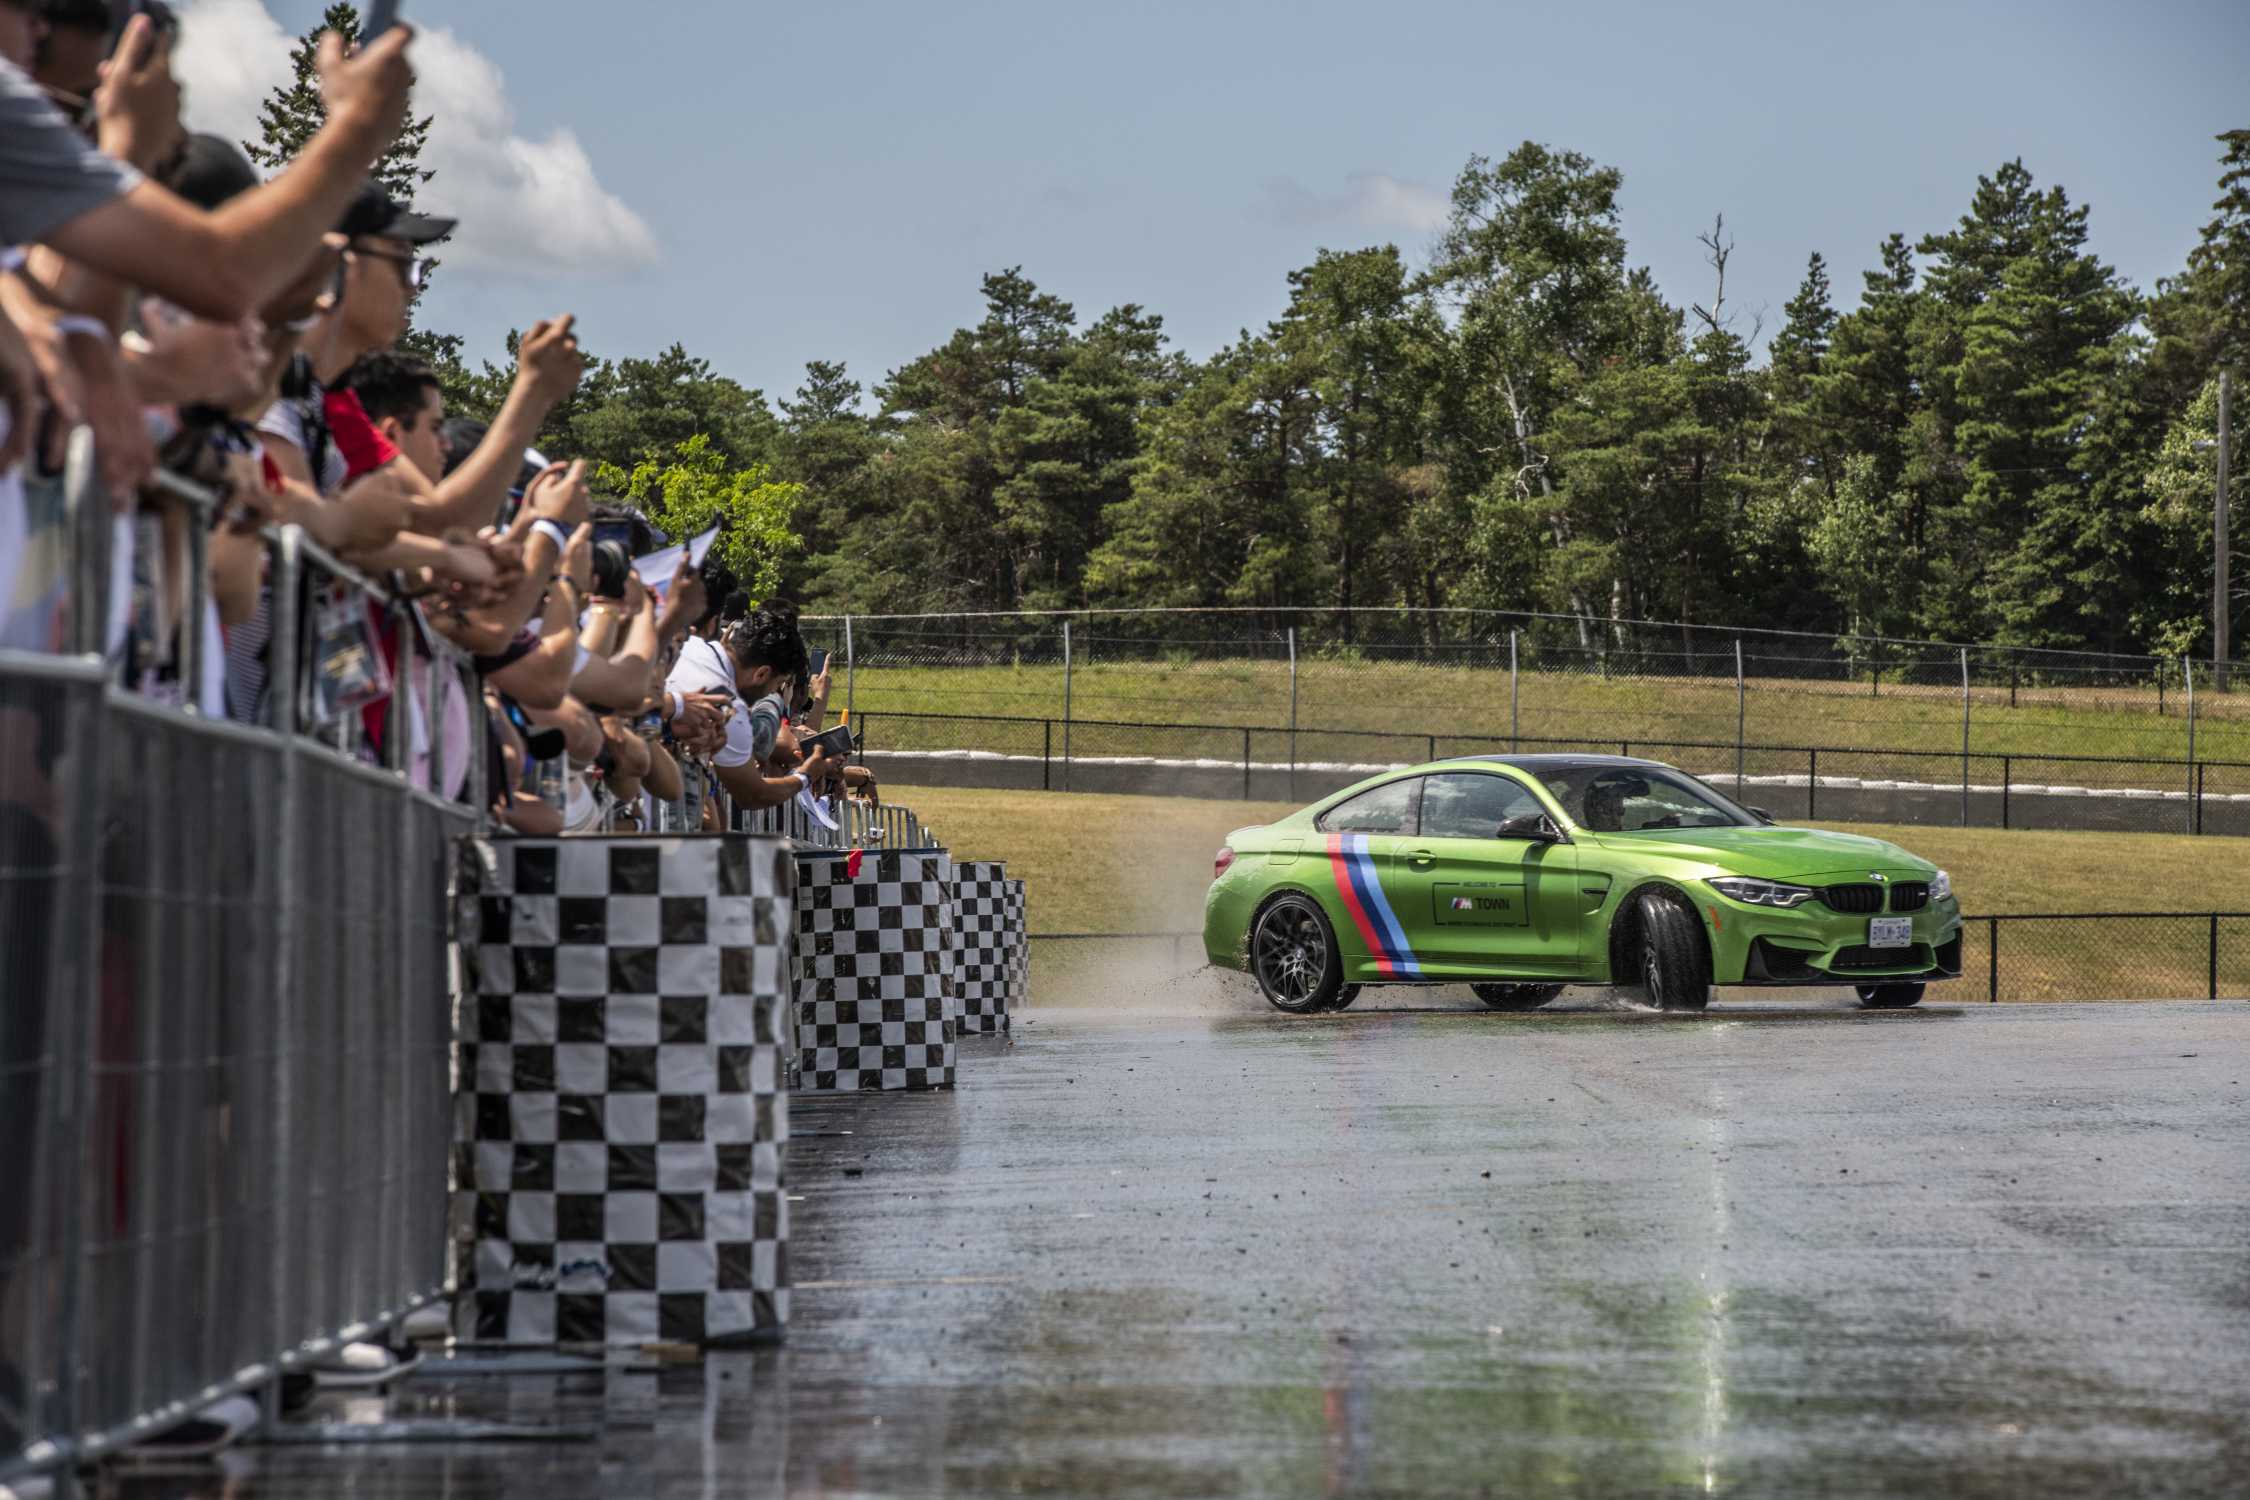 A BMW M4 performs during the drift show at the BMW M Festival. Canadian Tire Motorsport Park, Bowmanville, Ontario. (07/2019)